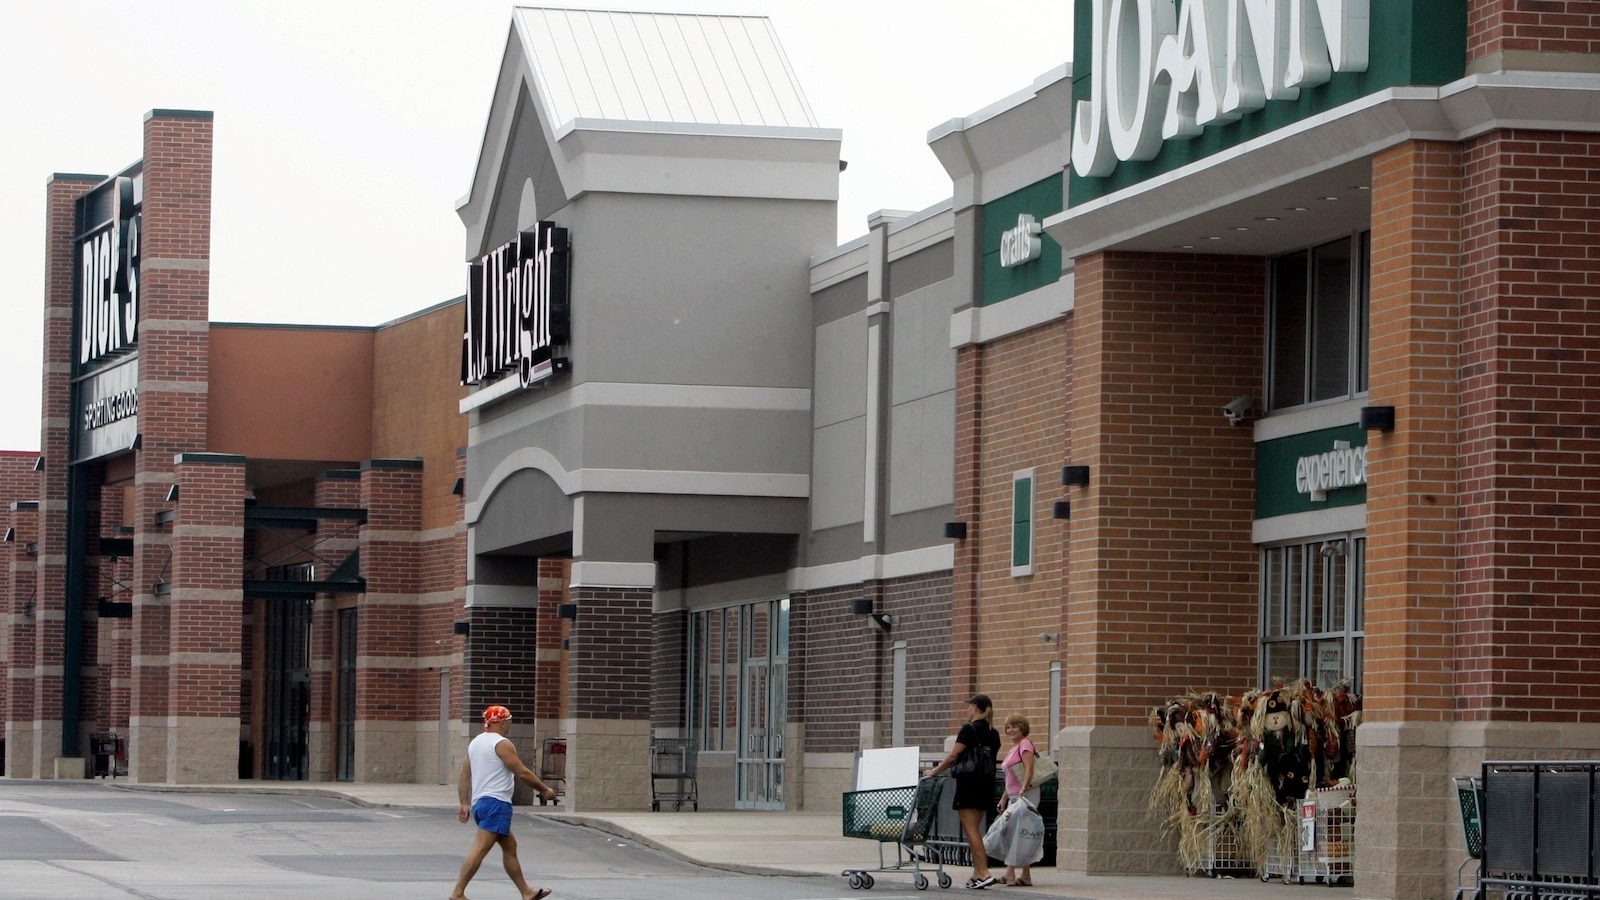 Joann, a crafts retailer, files for Chapter 11 bankruptcy protection